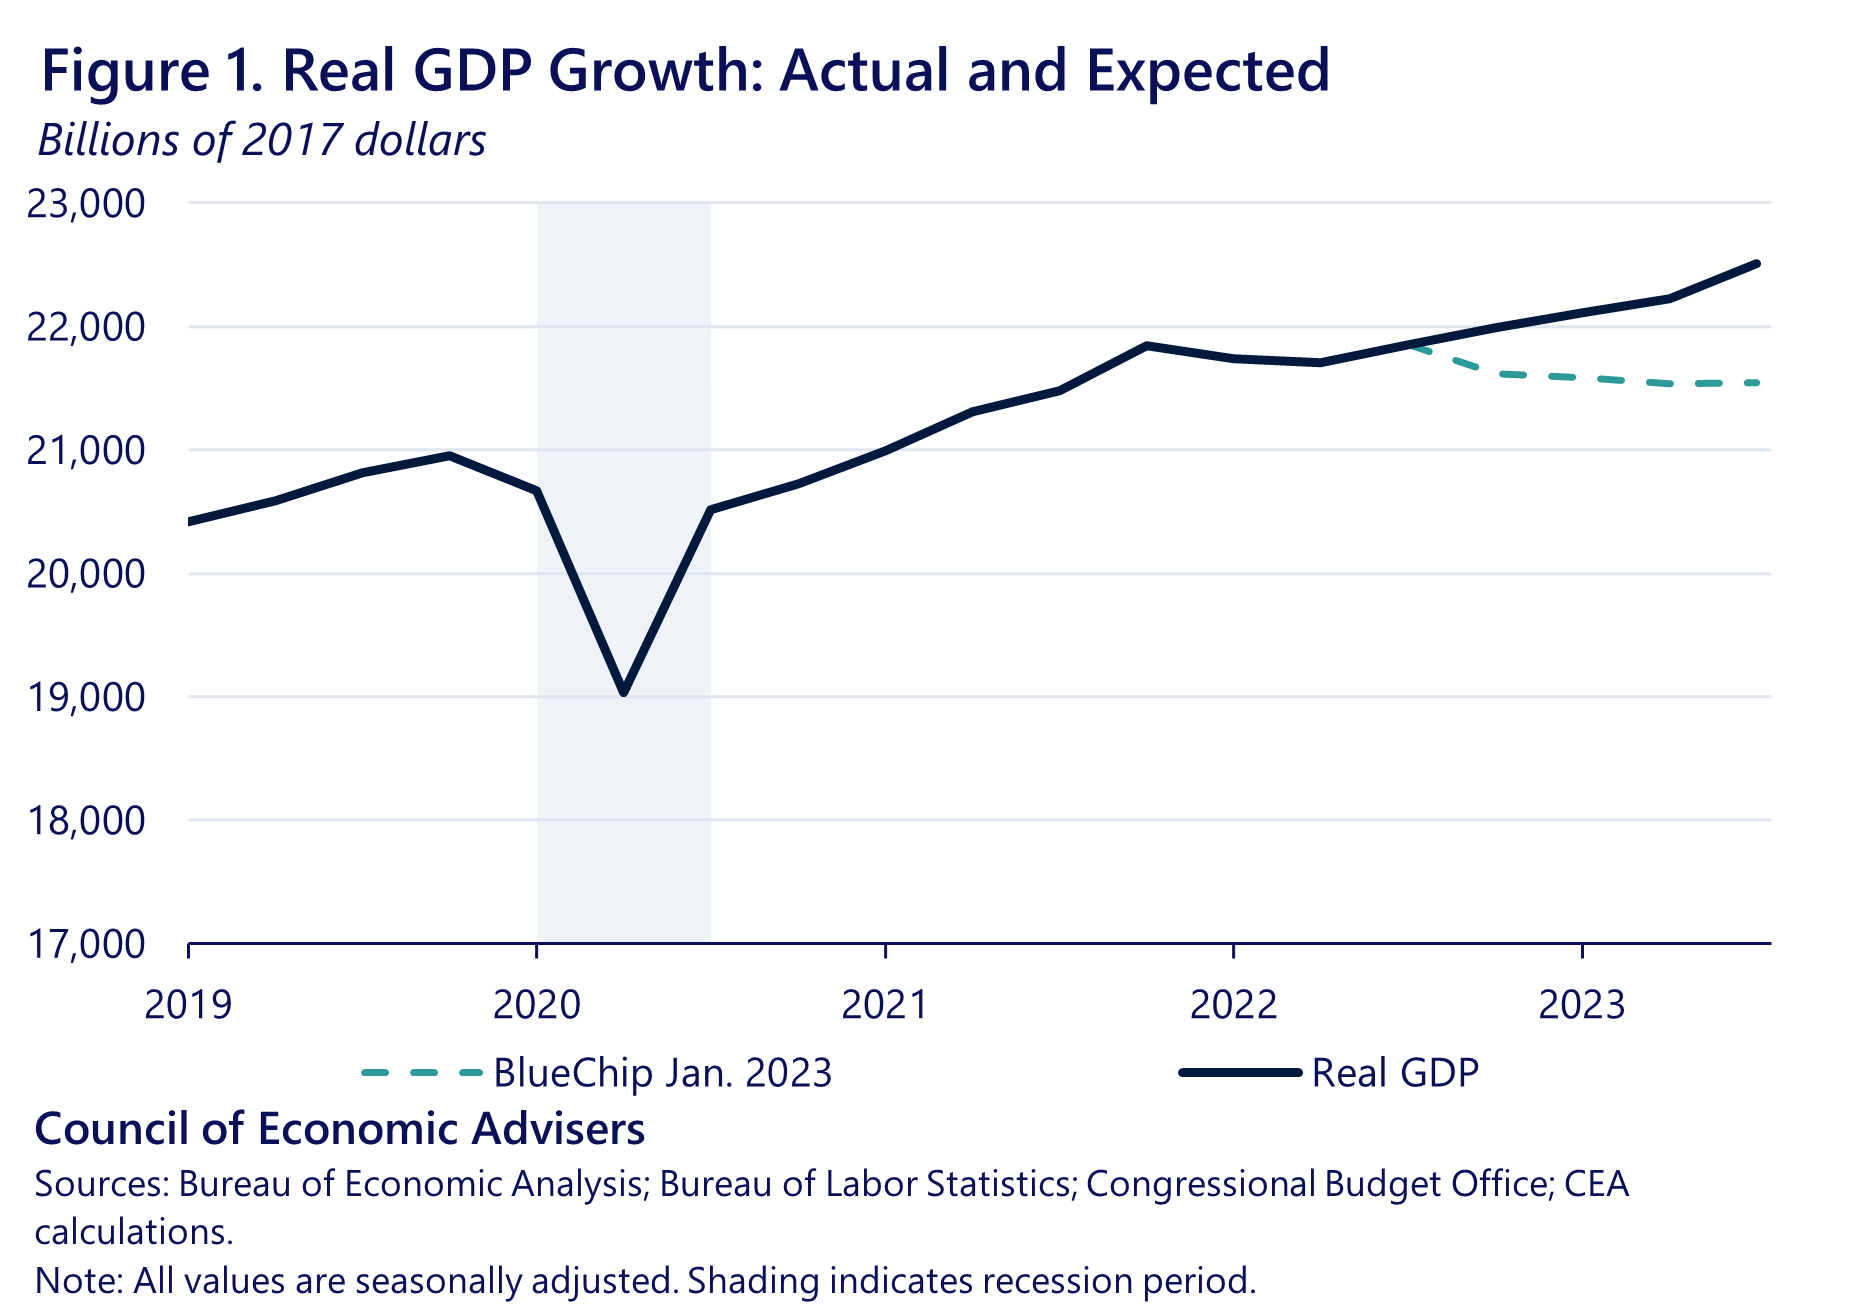 Ten Charts That Explain the U.S. Economy in 2023 CEA The White House